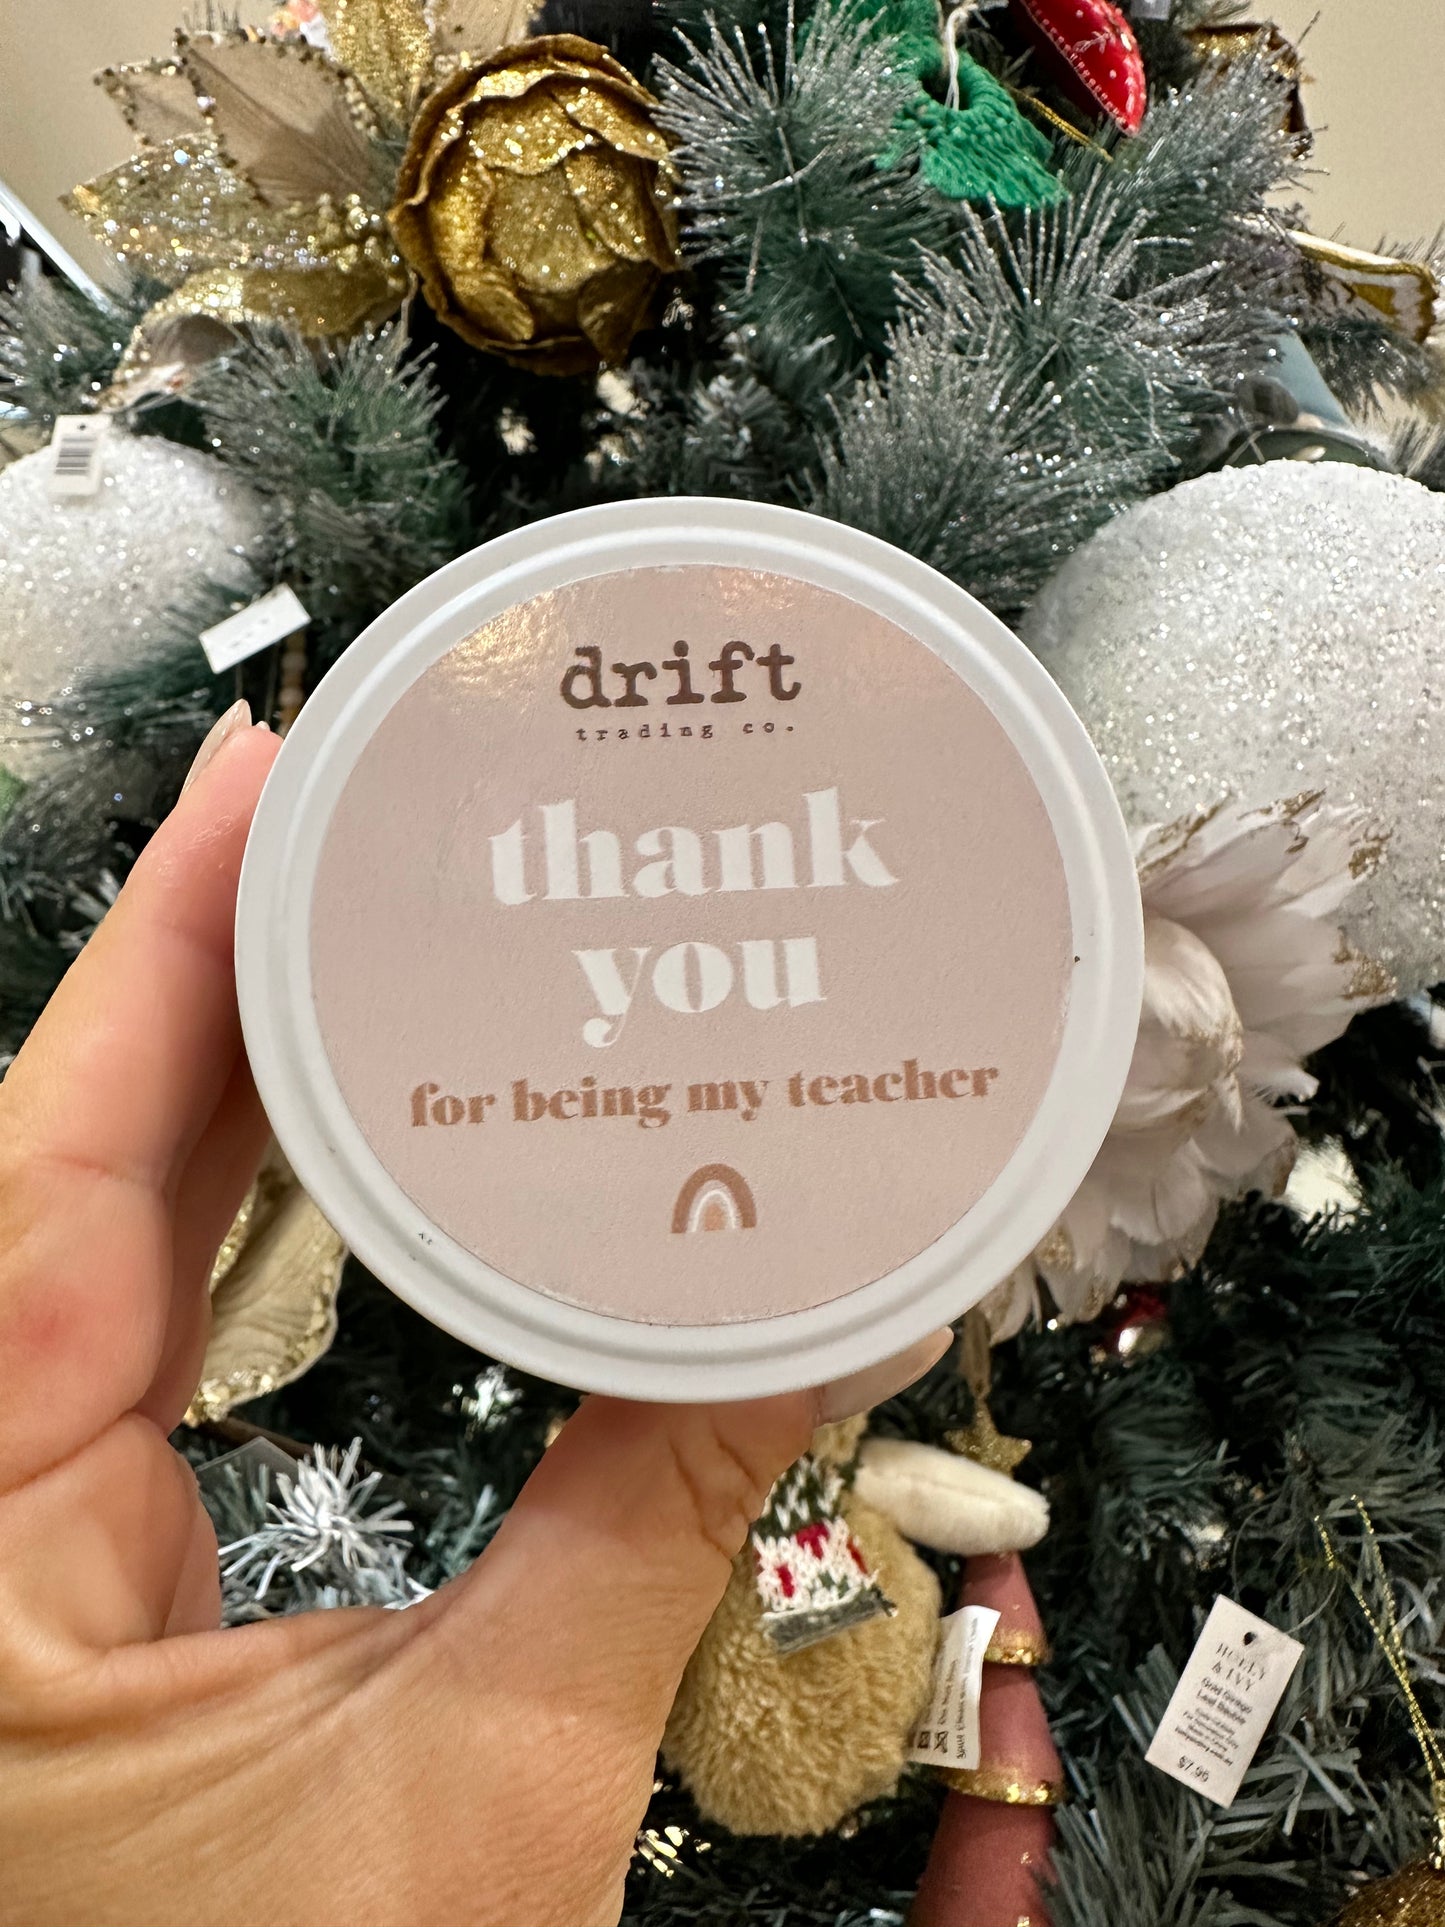 Drift Trading Co. Cutsey Quote Candles